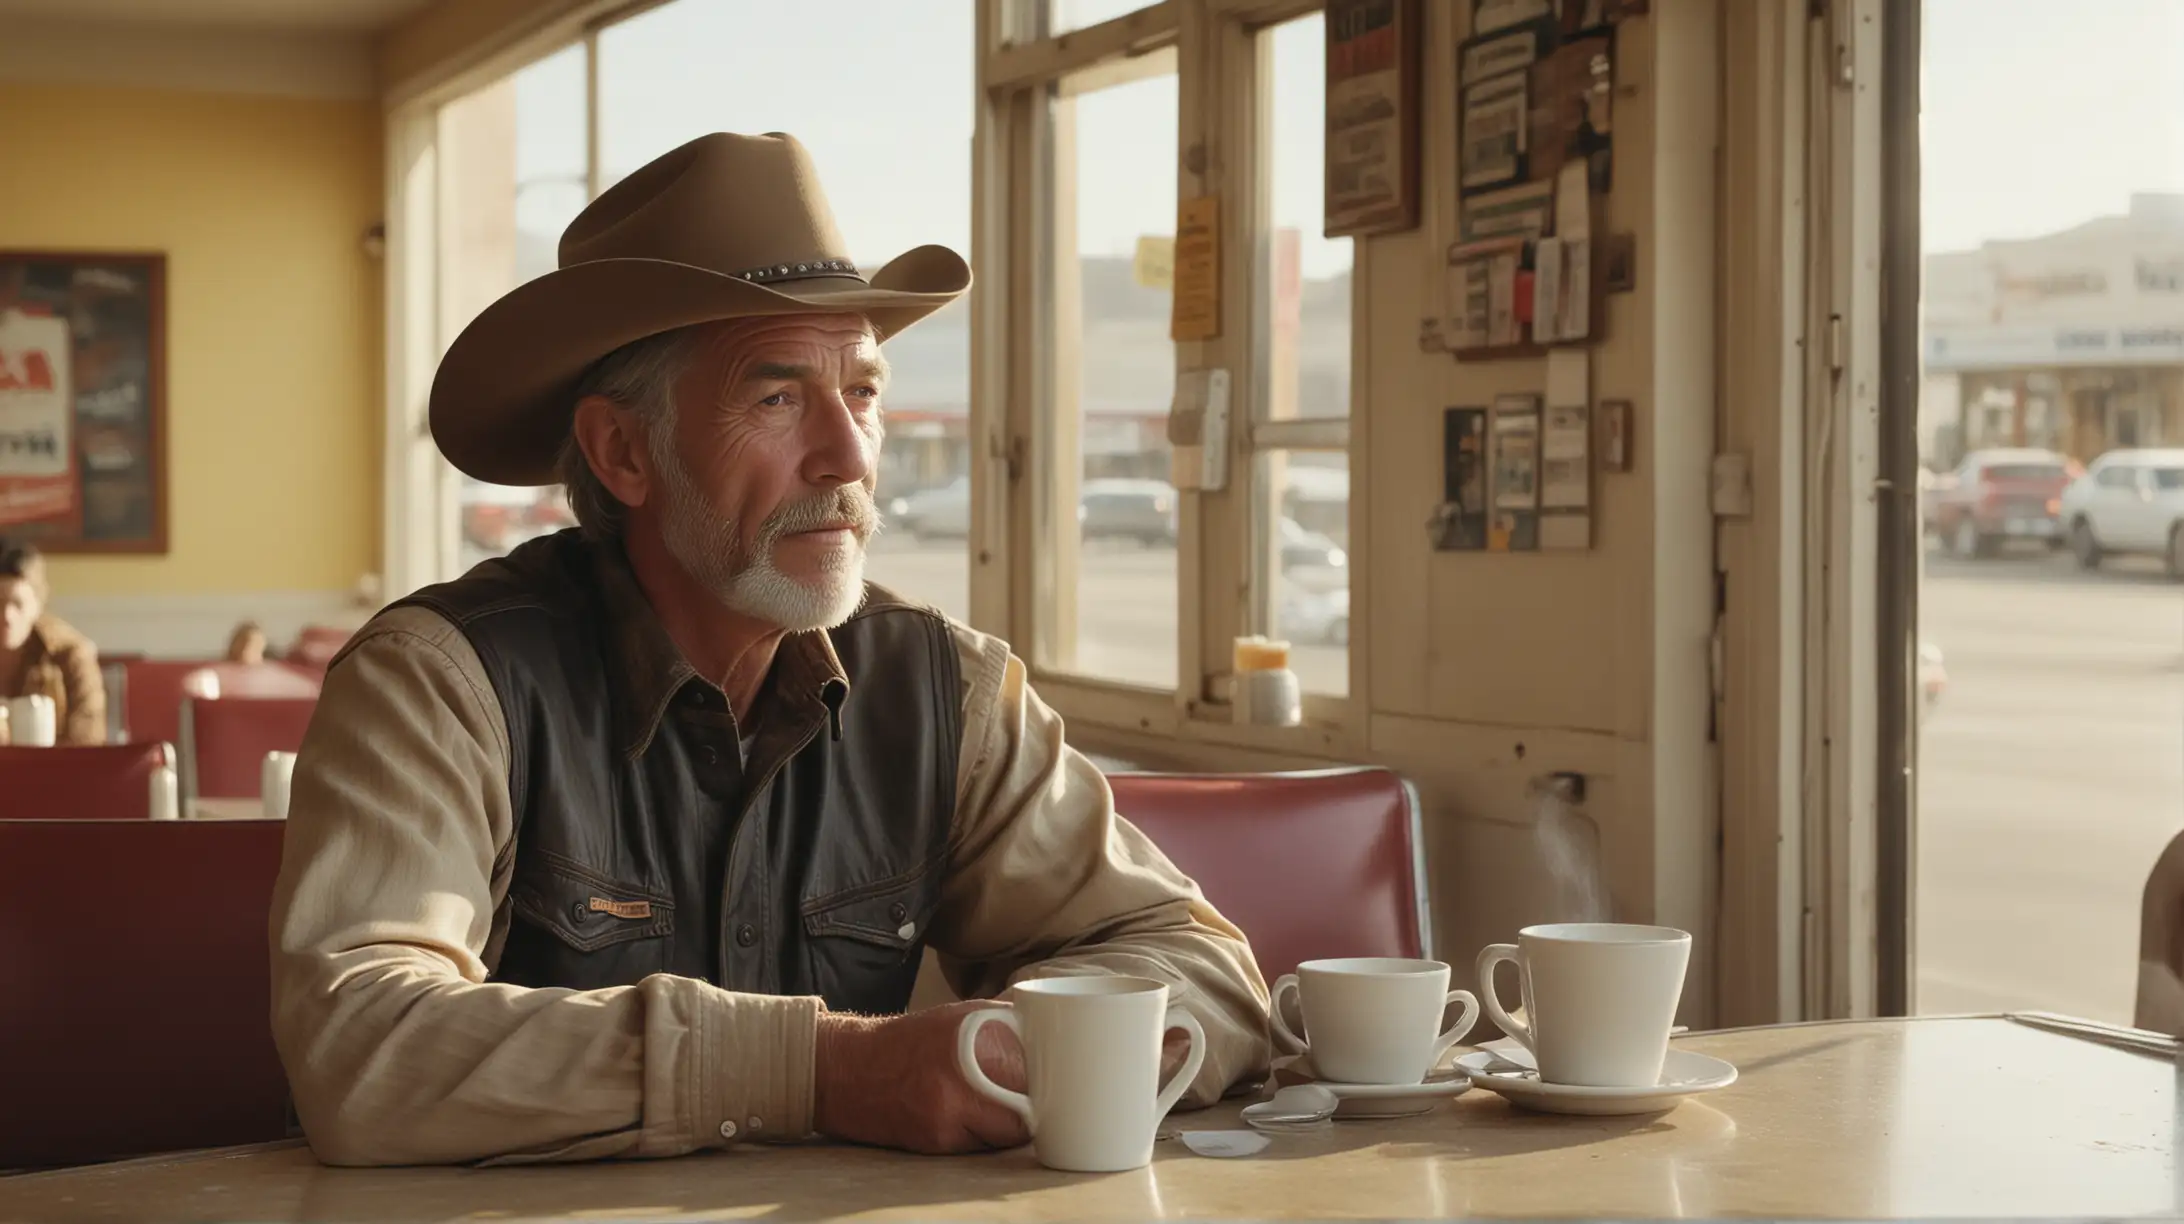 Solitary Cowboy Contemplates Over Breakfast in Busy Diner